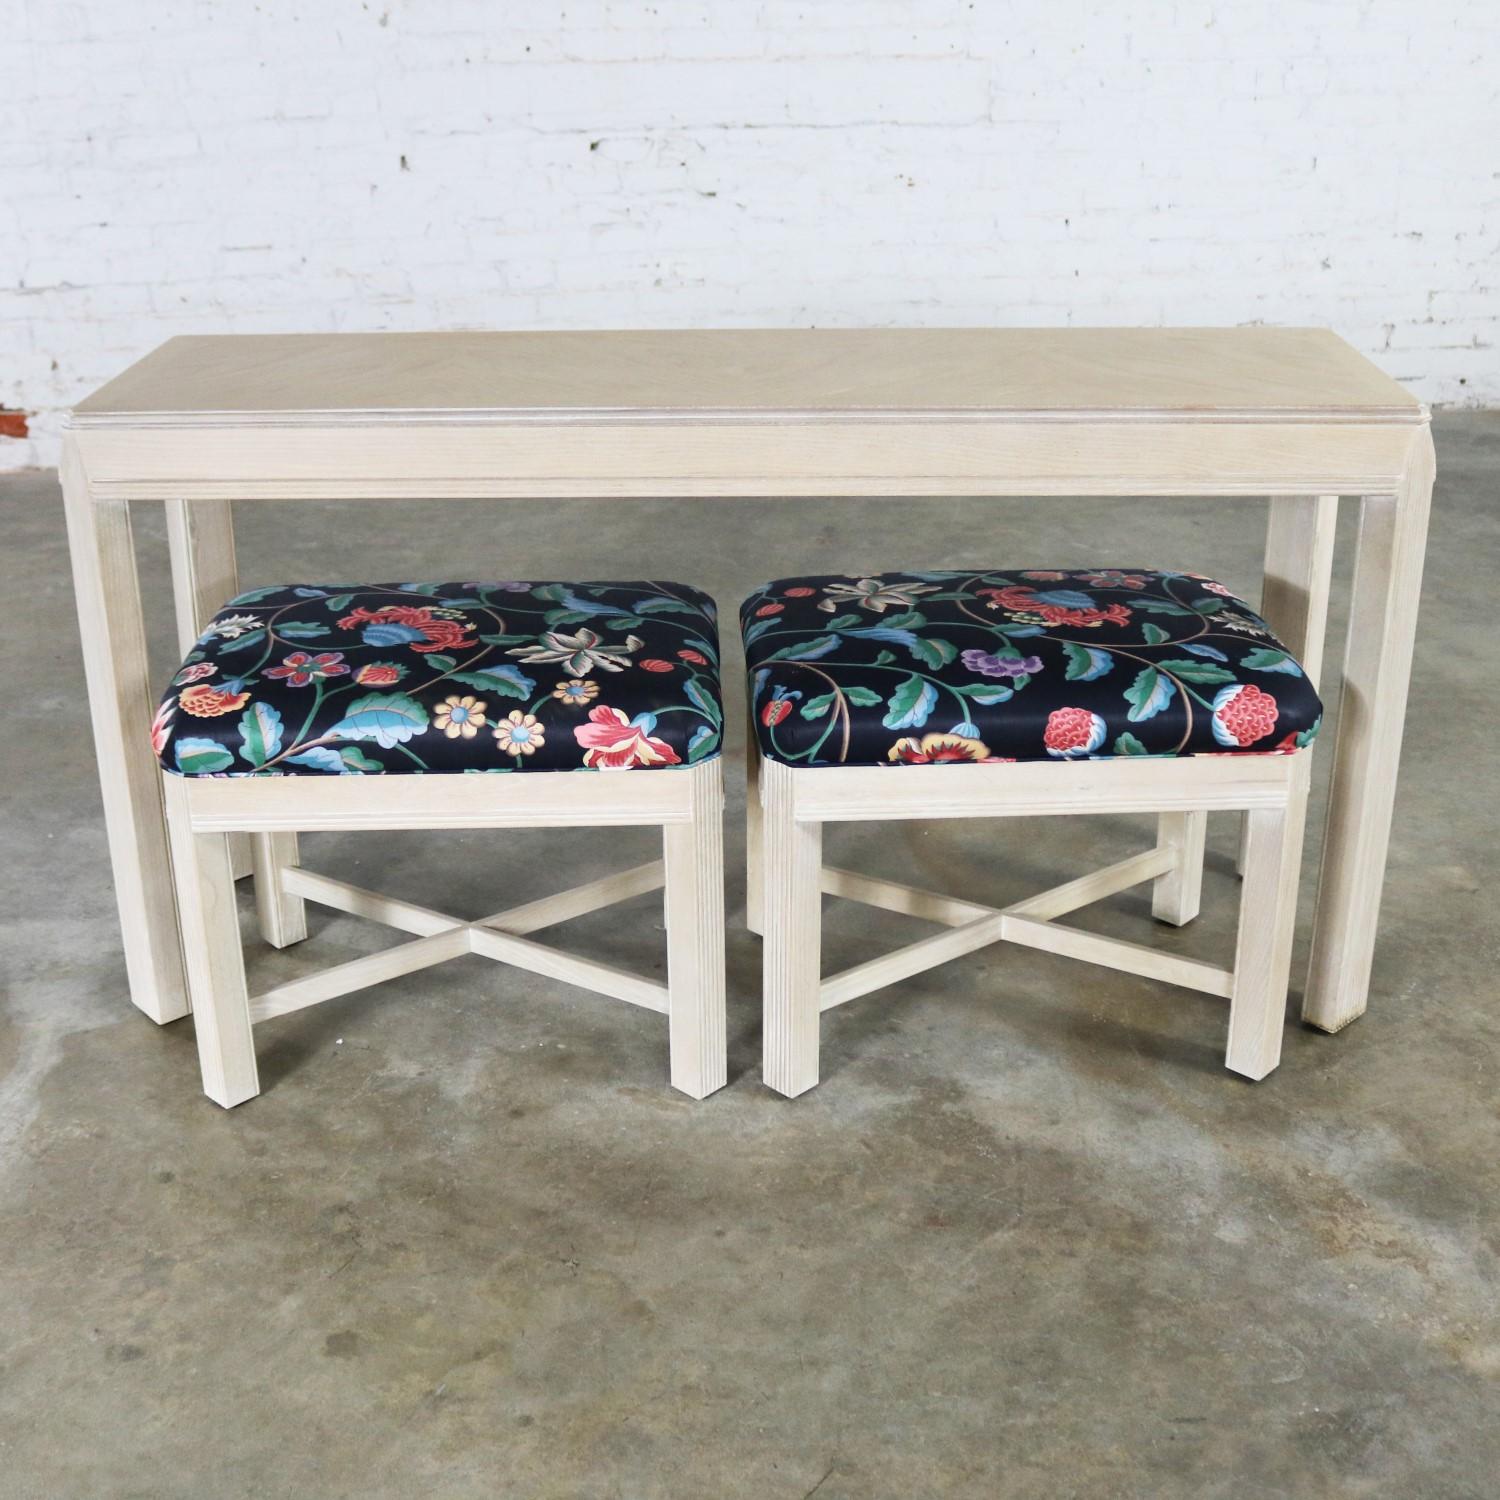 Handsome vintage transitional modern console table or sofa table with a pair of matching benches by Drexel Heritage from their Transitions collection. They are in fabulous vintage condition and their ceruse off-white finish is beautiful as is the